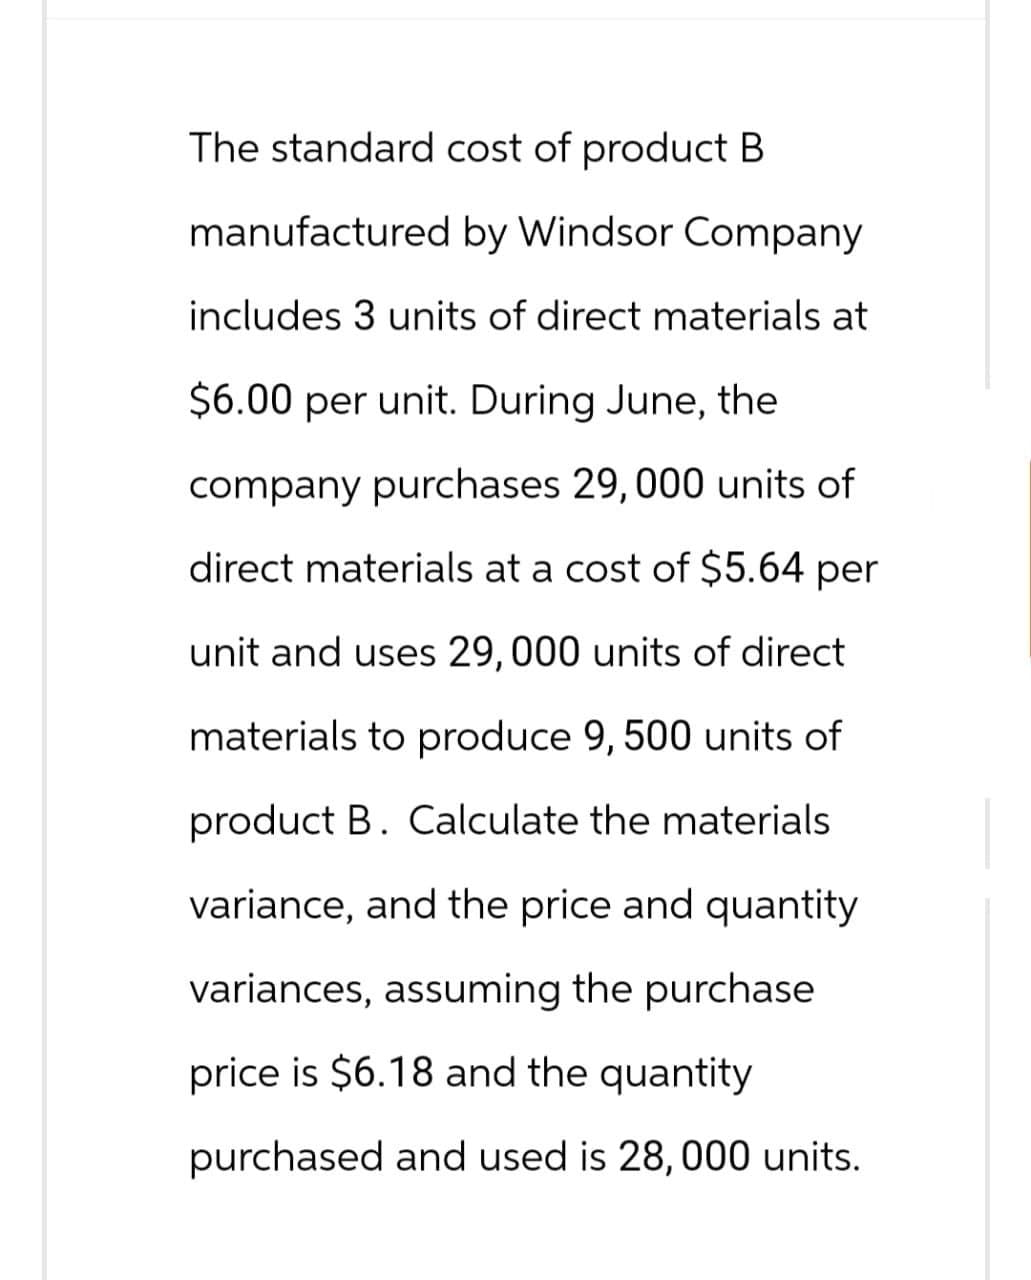 The standard cost of product B
manufactured by Windsor Company
includes 3 units of direct materials at
$6.00 per unit. During June, the
company purchases 29, 000 units of
direct materials at a cost of $5.64 per
unit and uses 29, 000 units of direct
materials to produce 9, 500 units of
product B. Calculate the materials
variance, and the price and quantity
variances, assuming the purchase
price is $6.18 and the quantity
purchased and used is 28, 000 units.